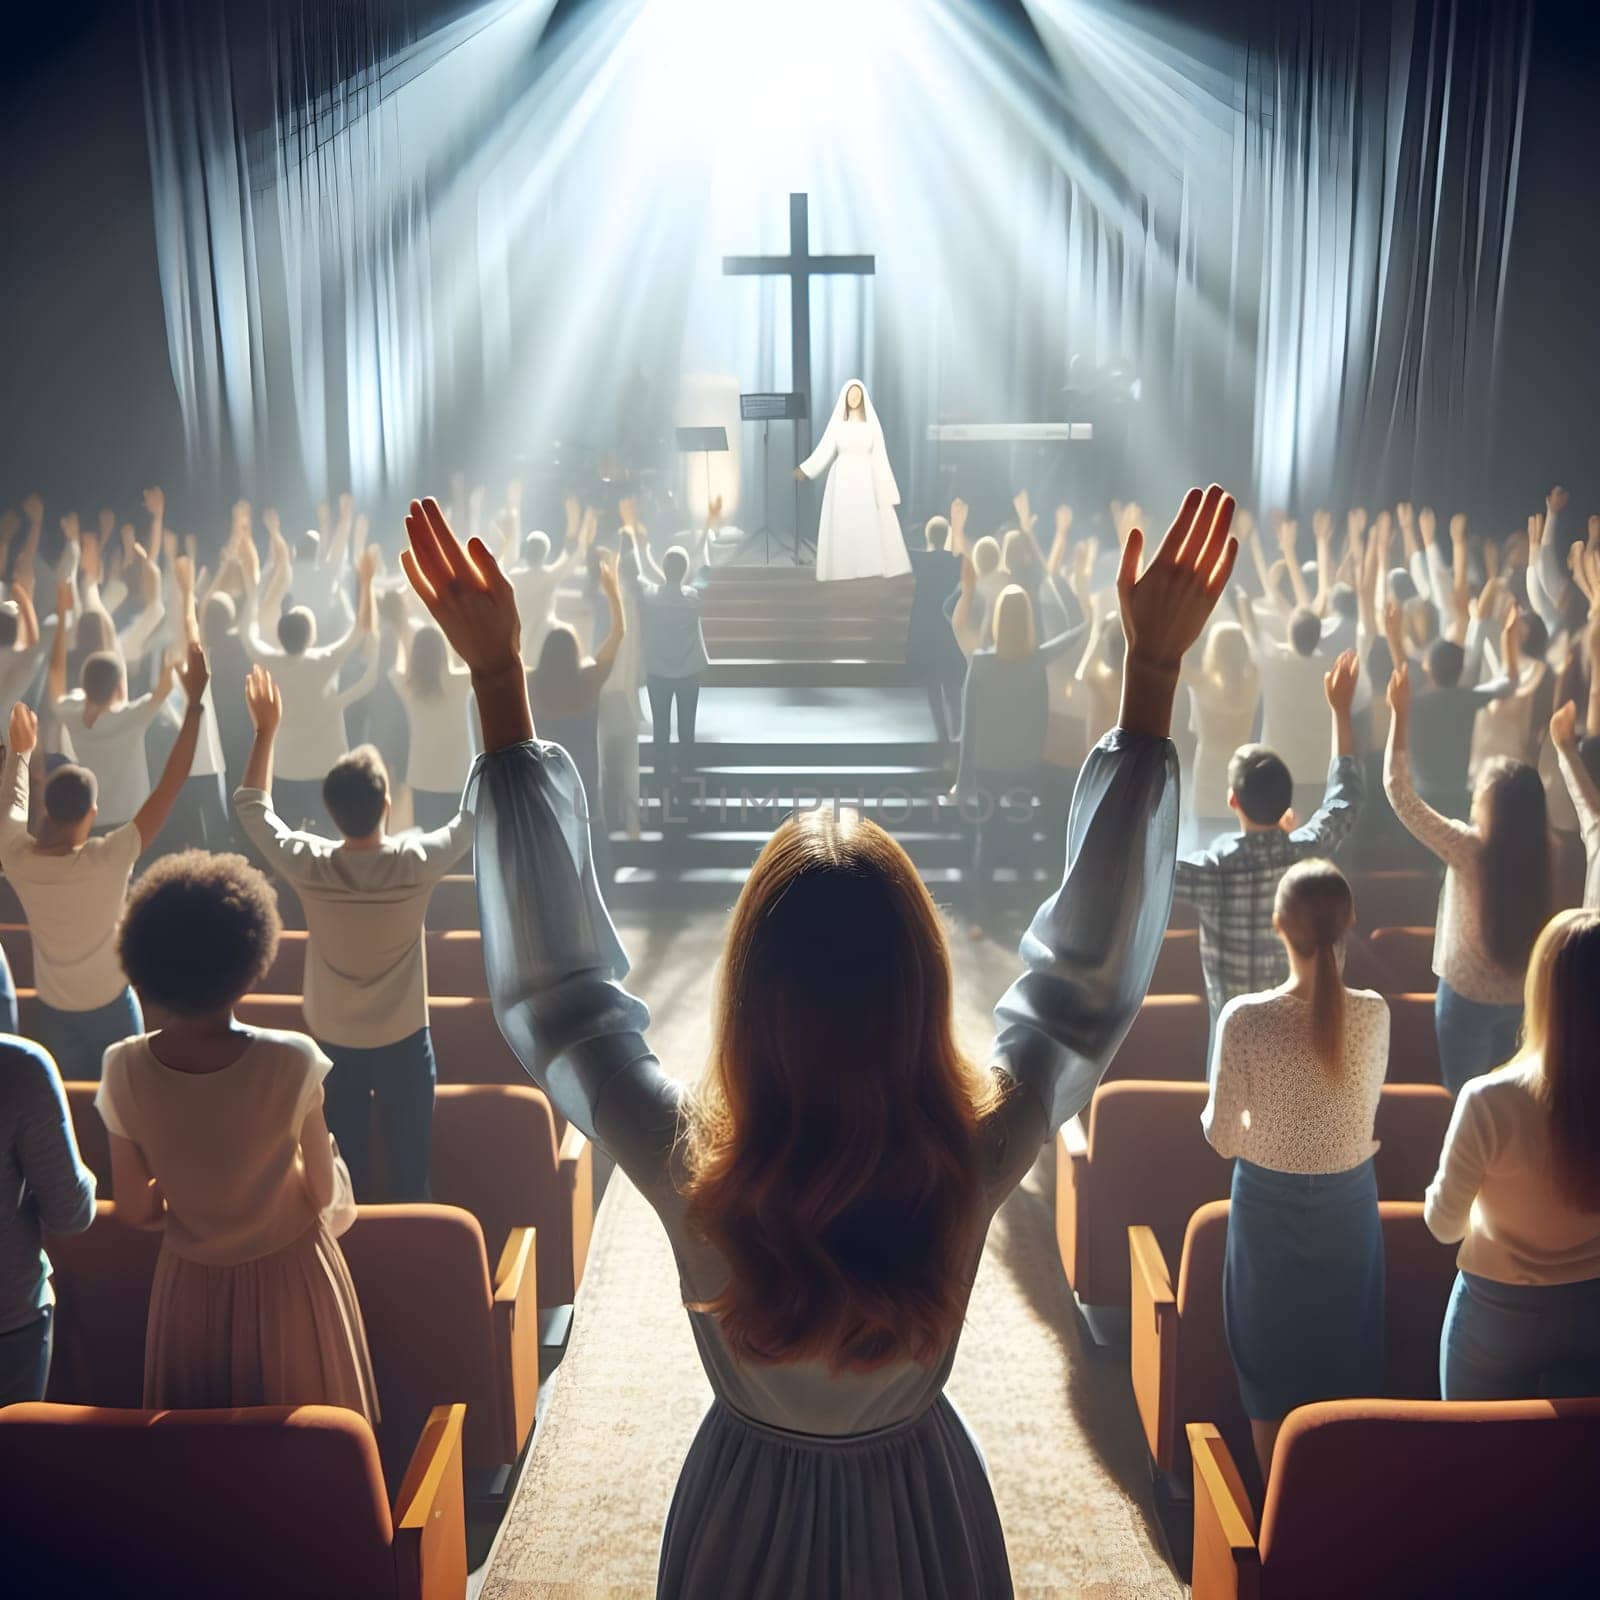 girl worships god, raising her hands up in the concert hall among the believers